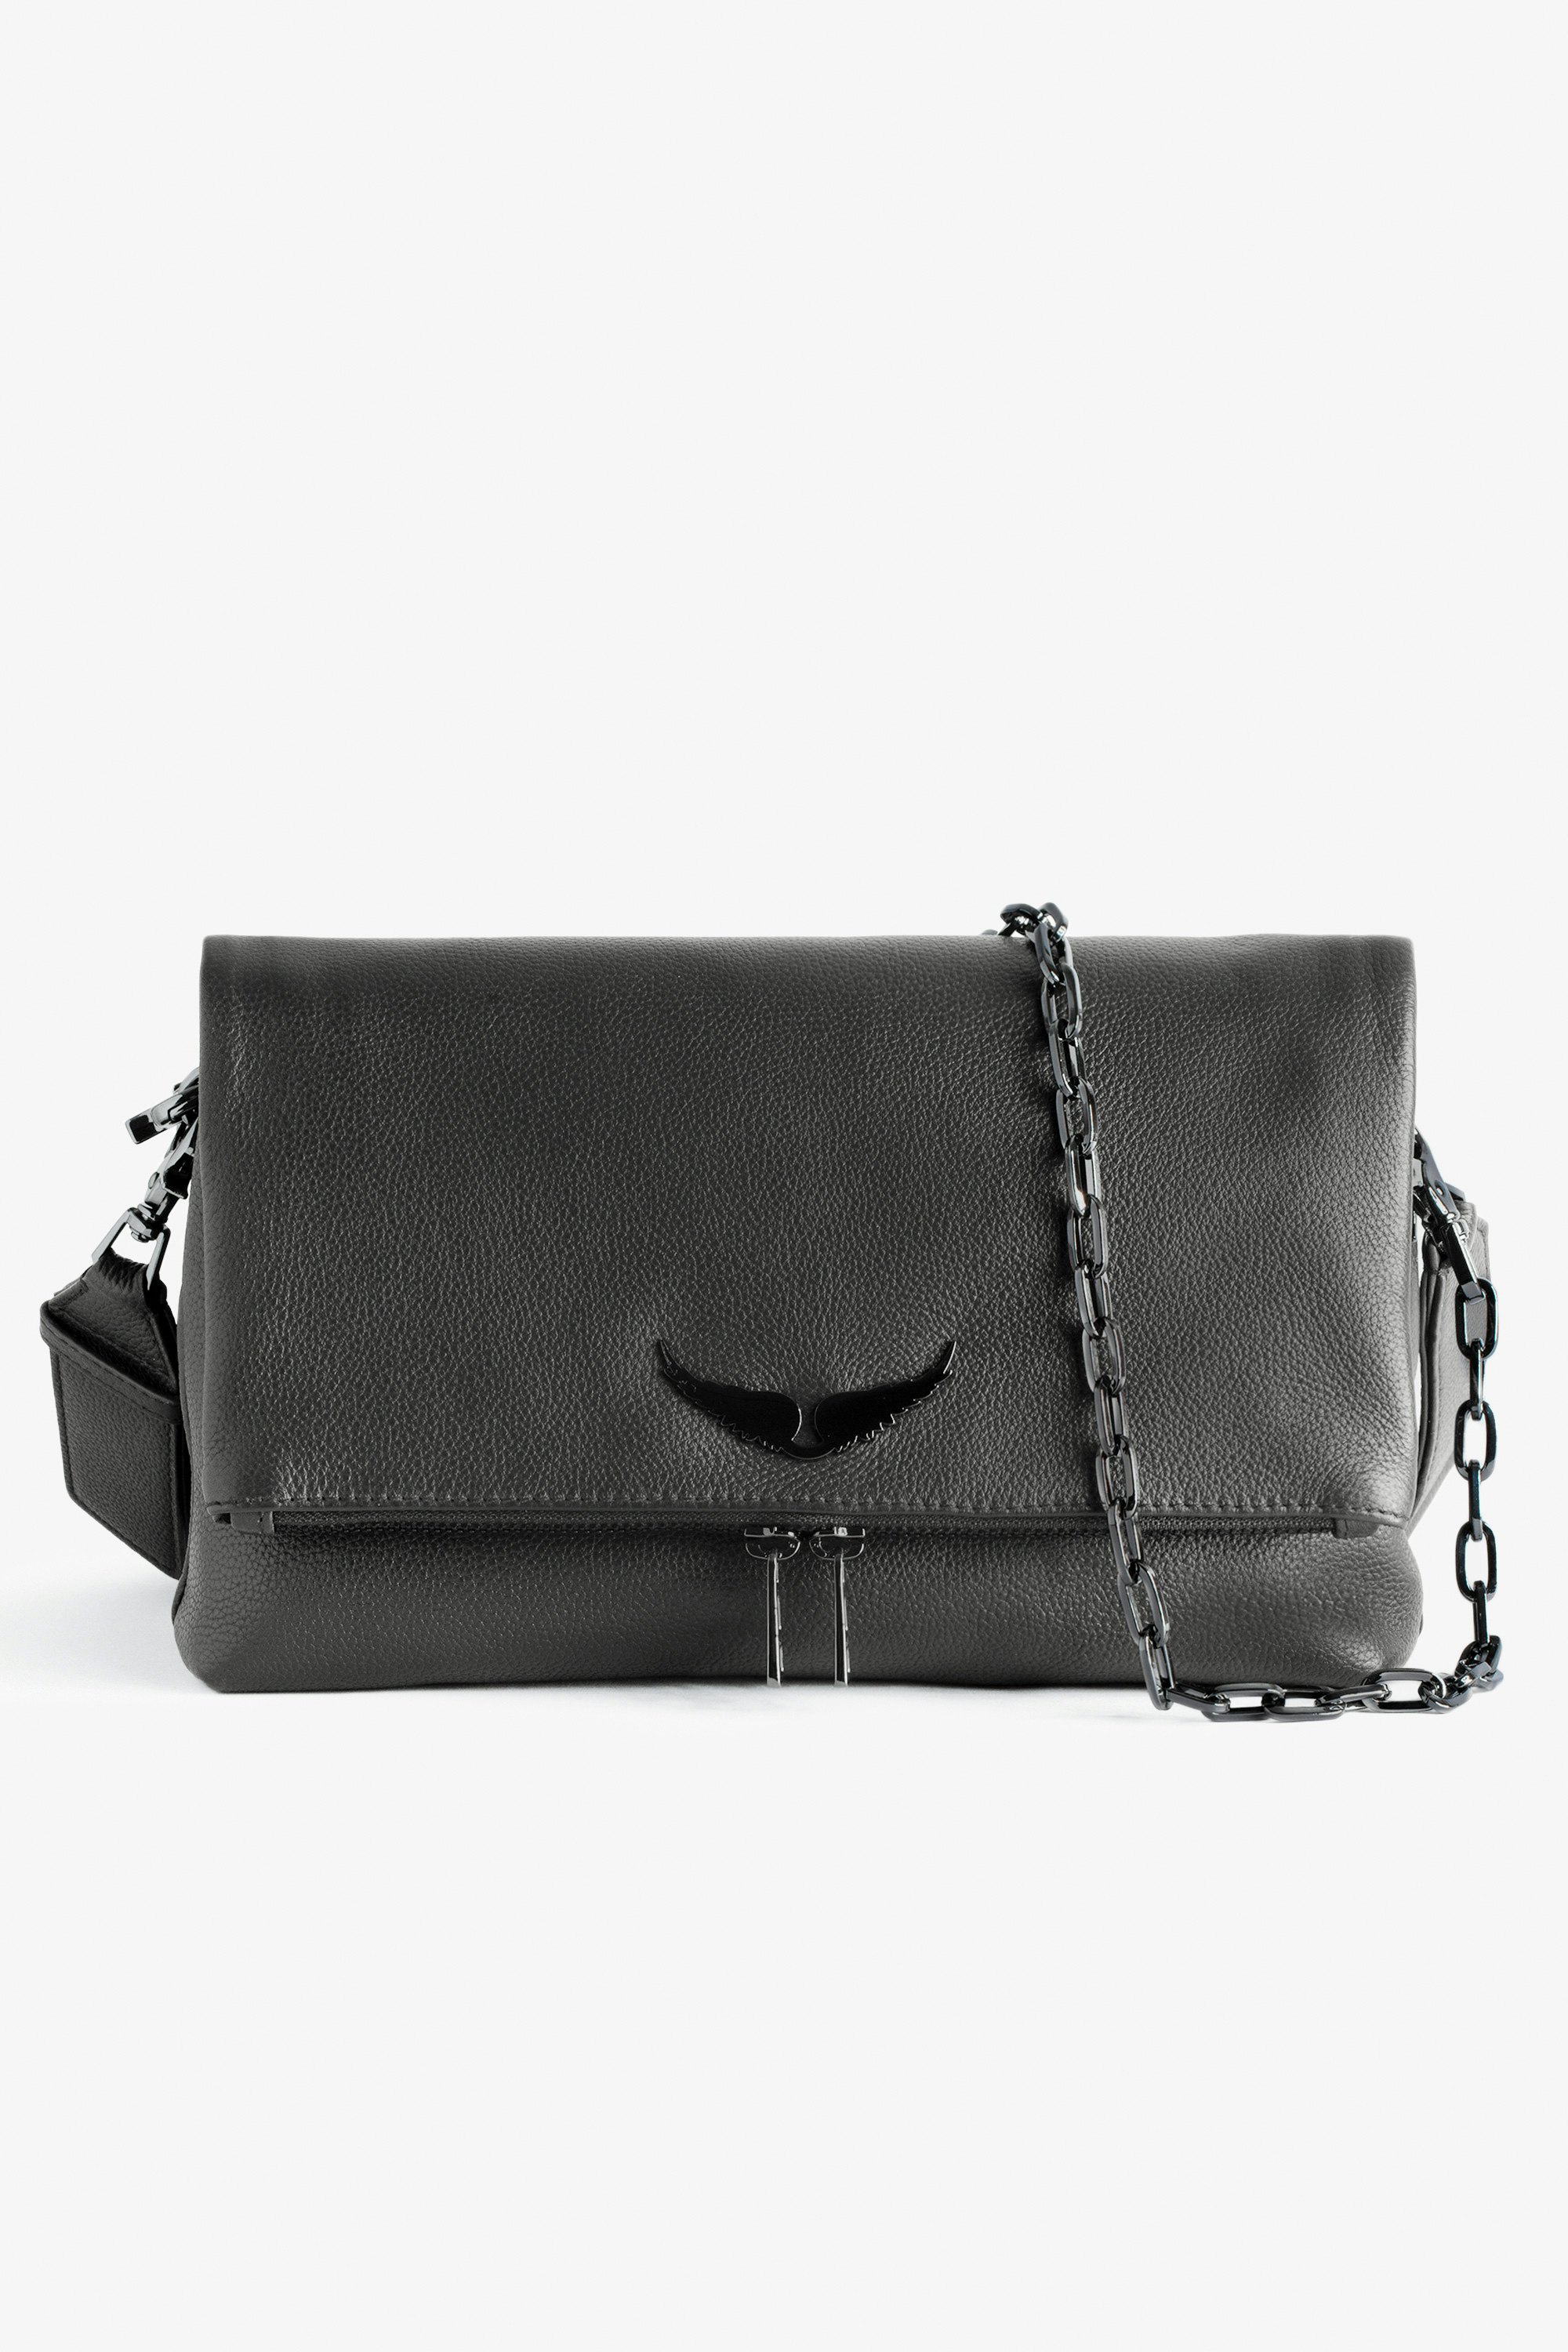 Rocky バッグ Women’s grey grained leather bag with shoulder strap and wings charm